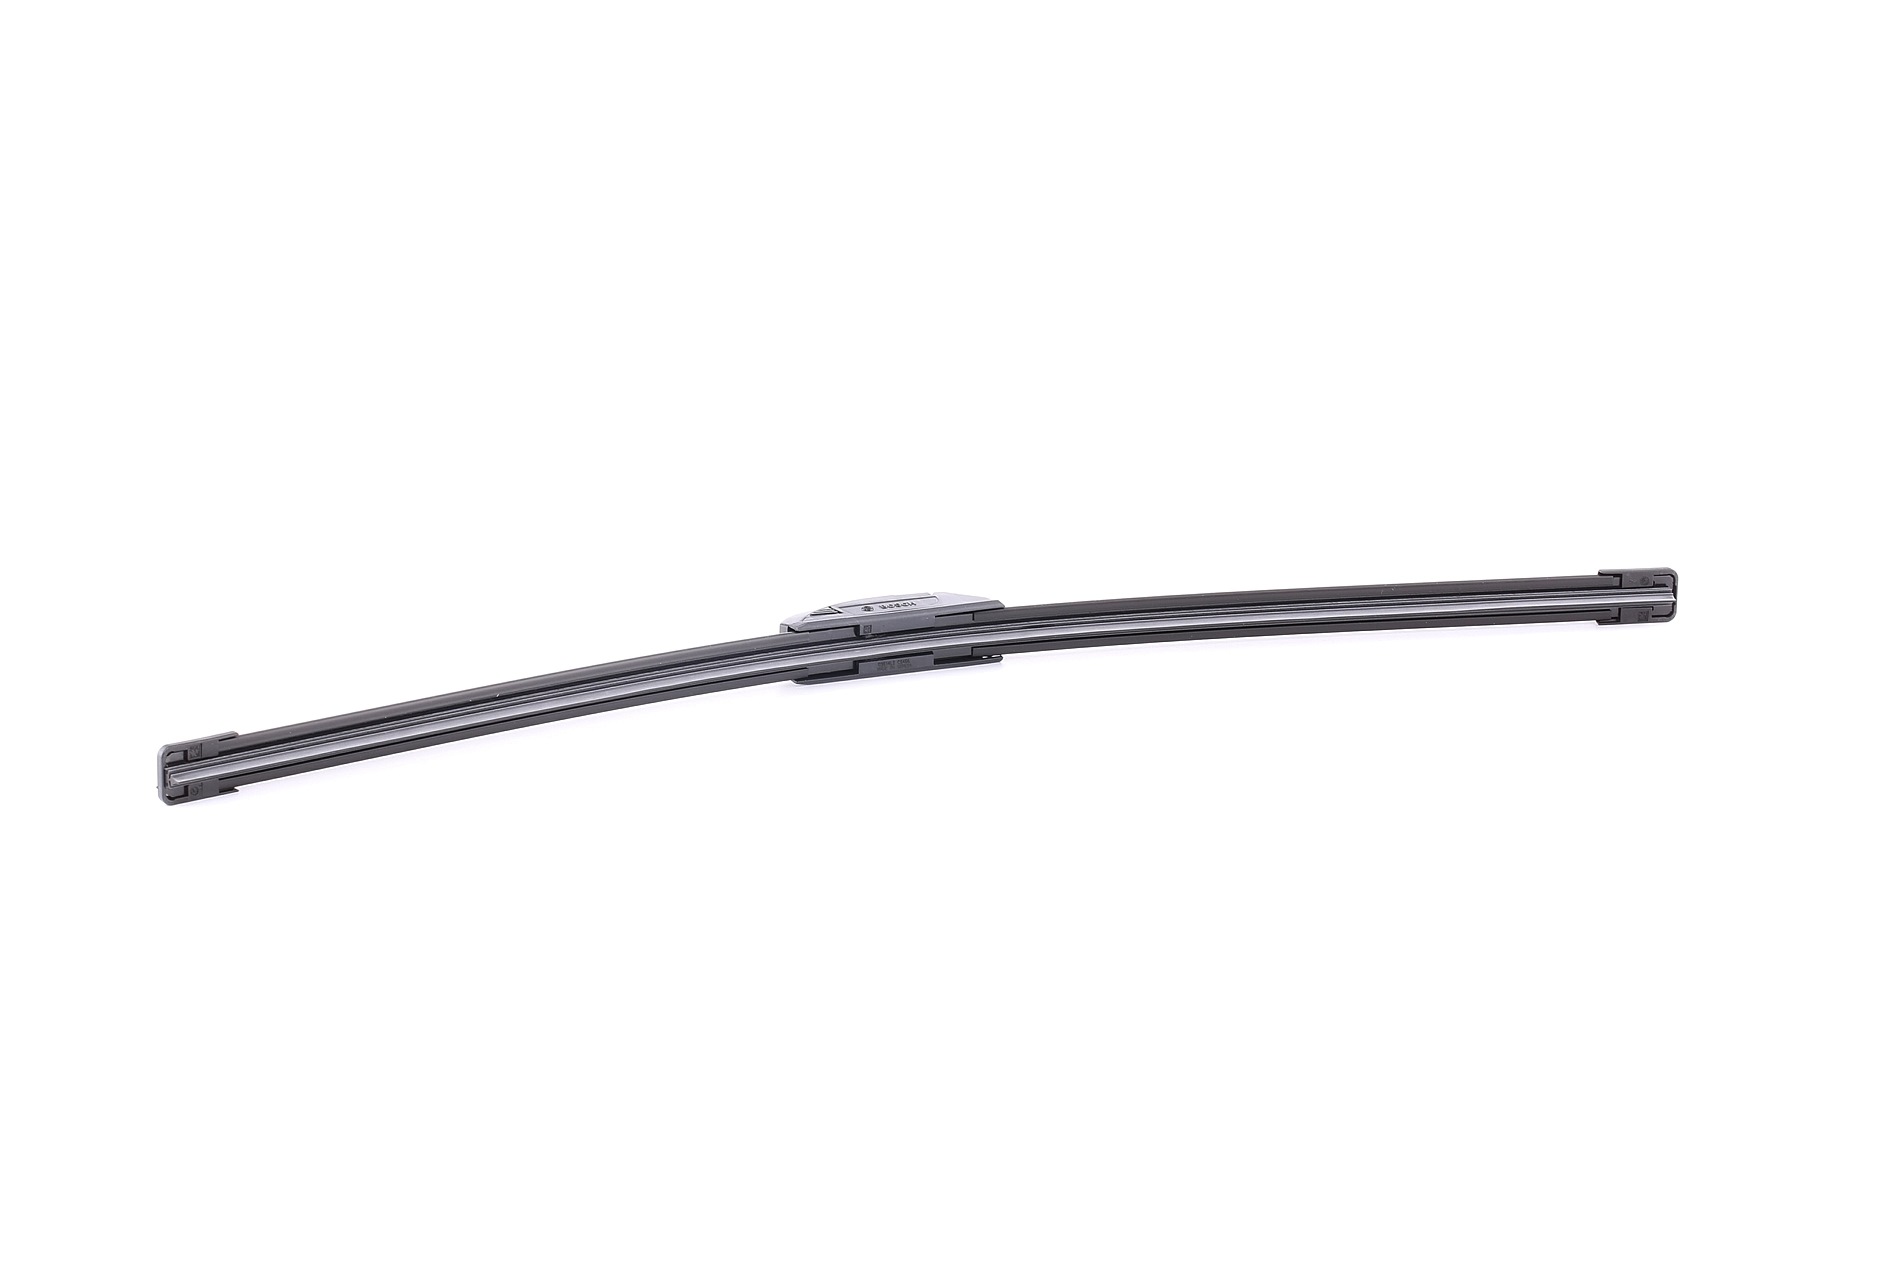 Wiper blade BOSCH 3 397 008 940 - Lancia Y Wiper and washer system spare parts order